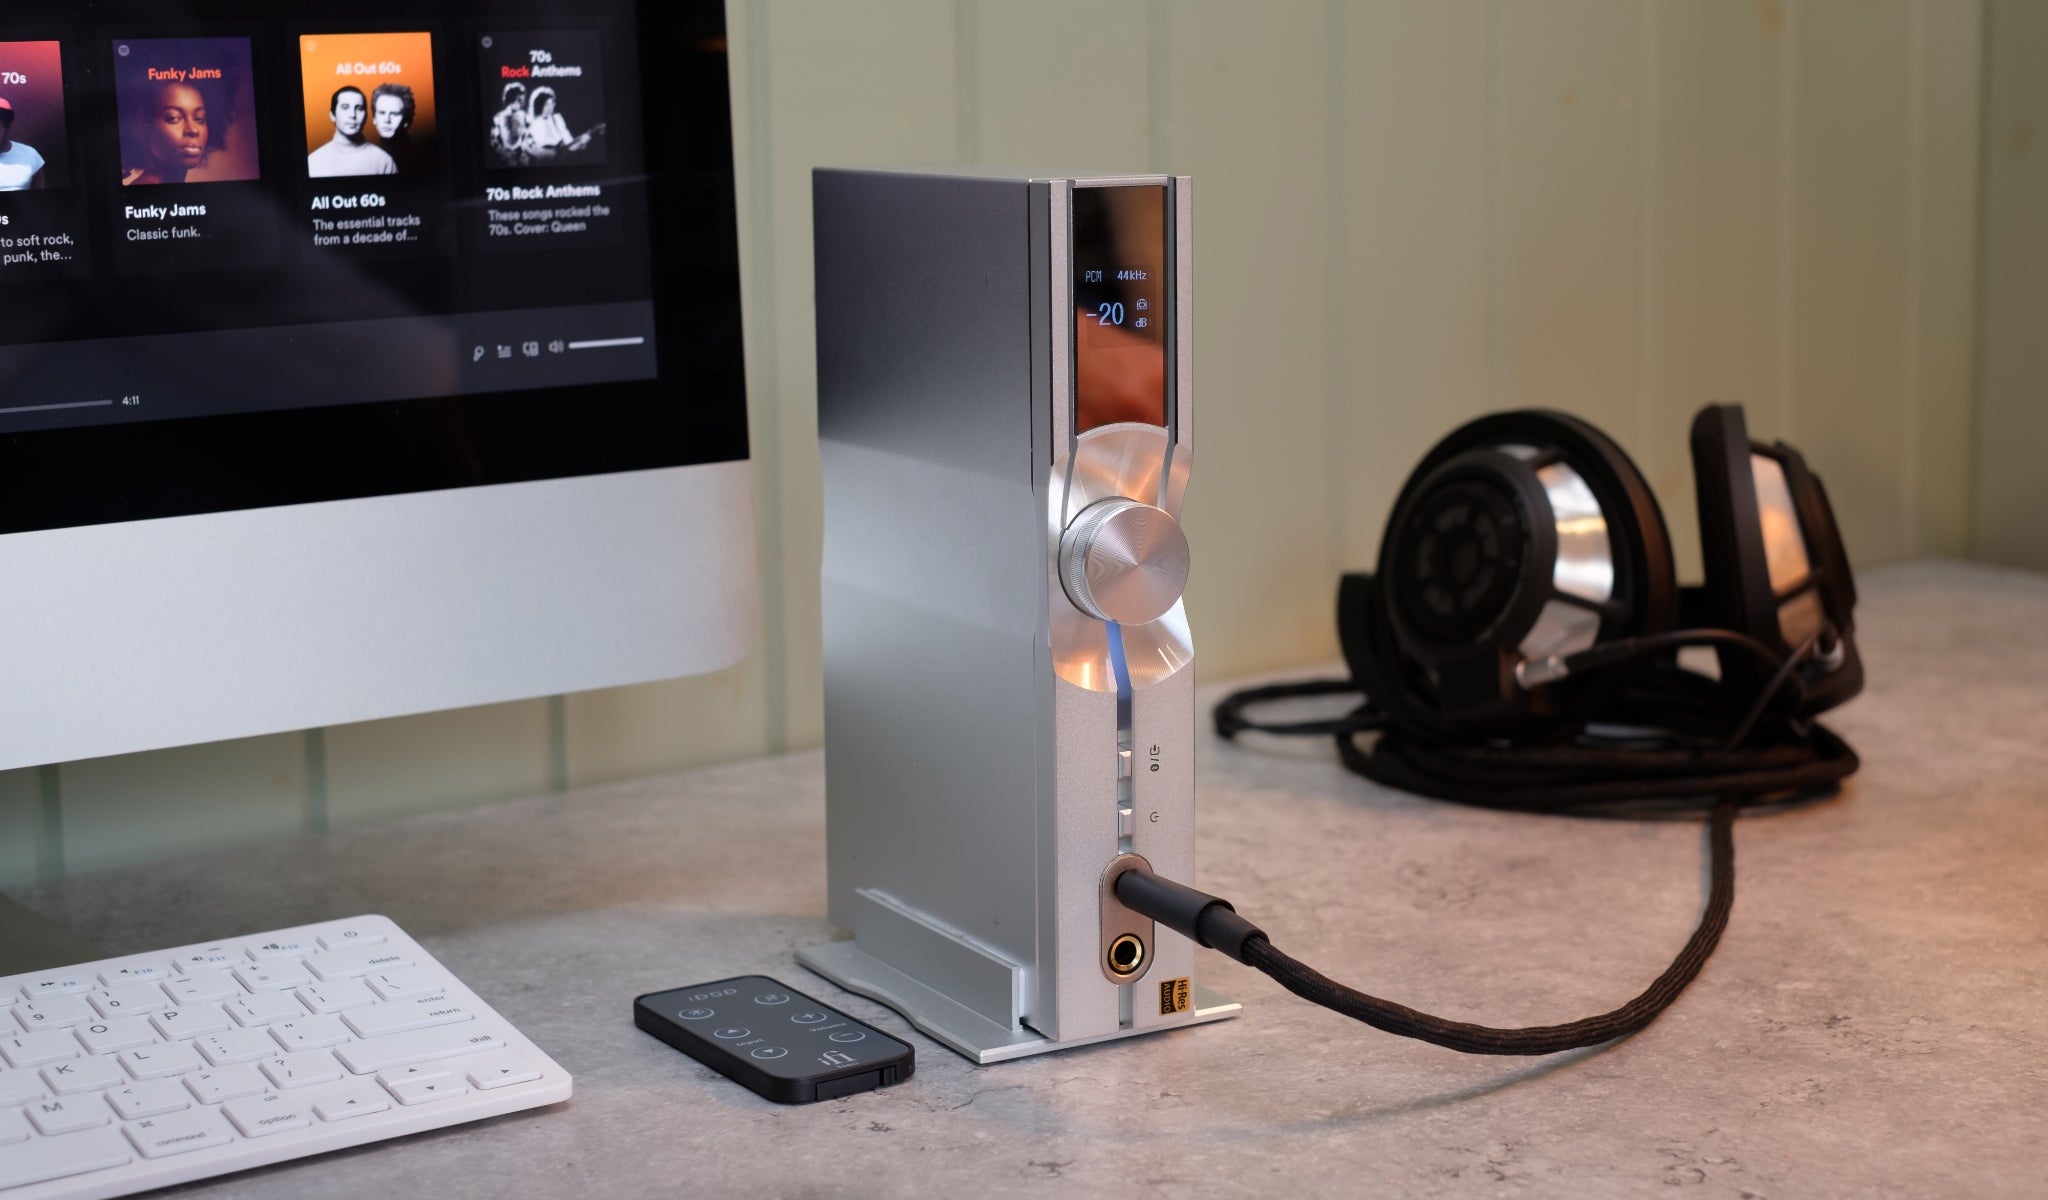 iFi NEO iDSD with attached Sennheiser headphones with iMac